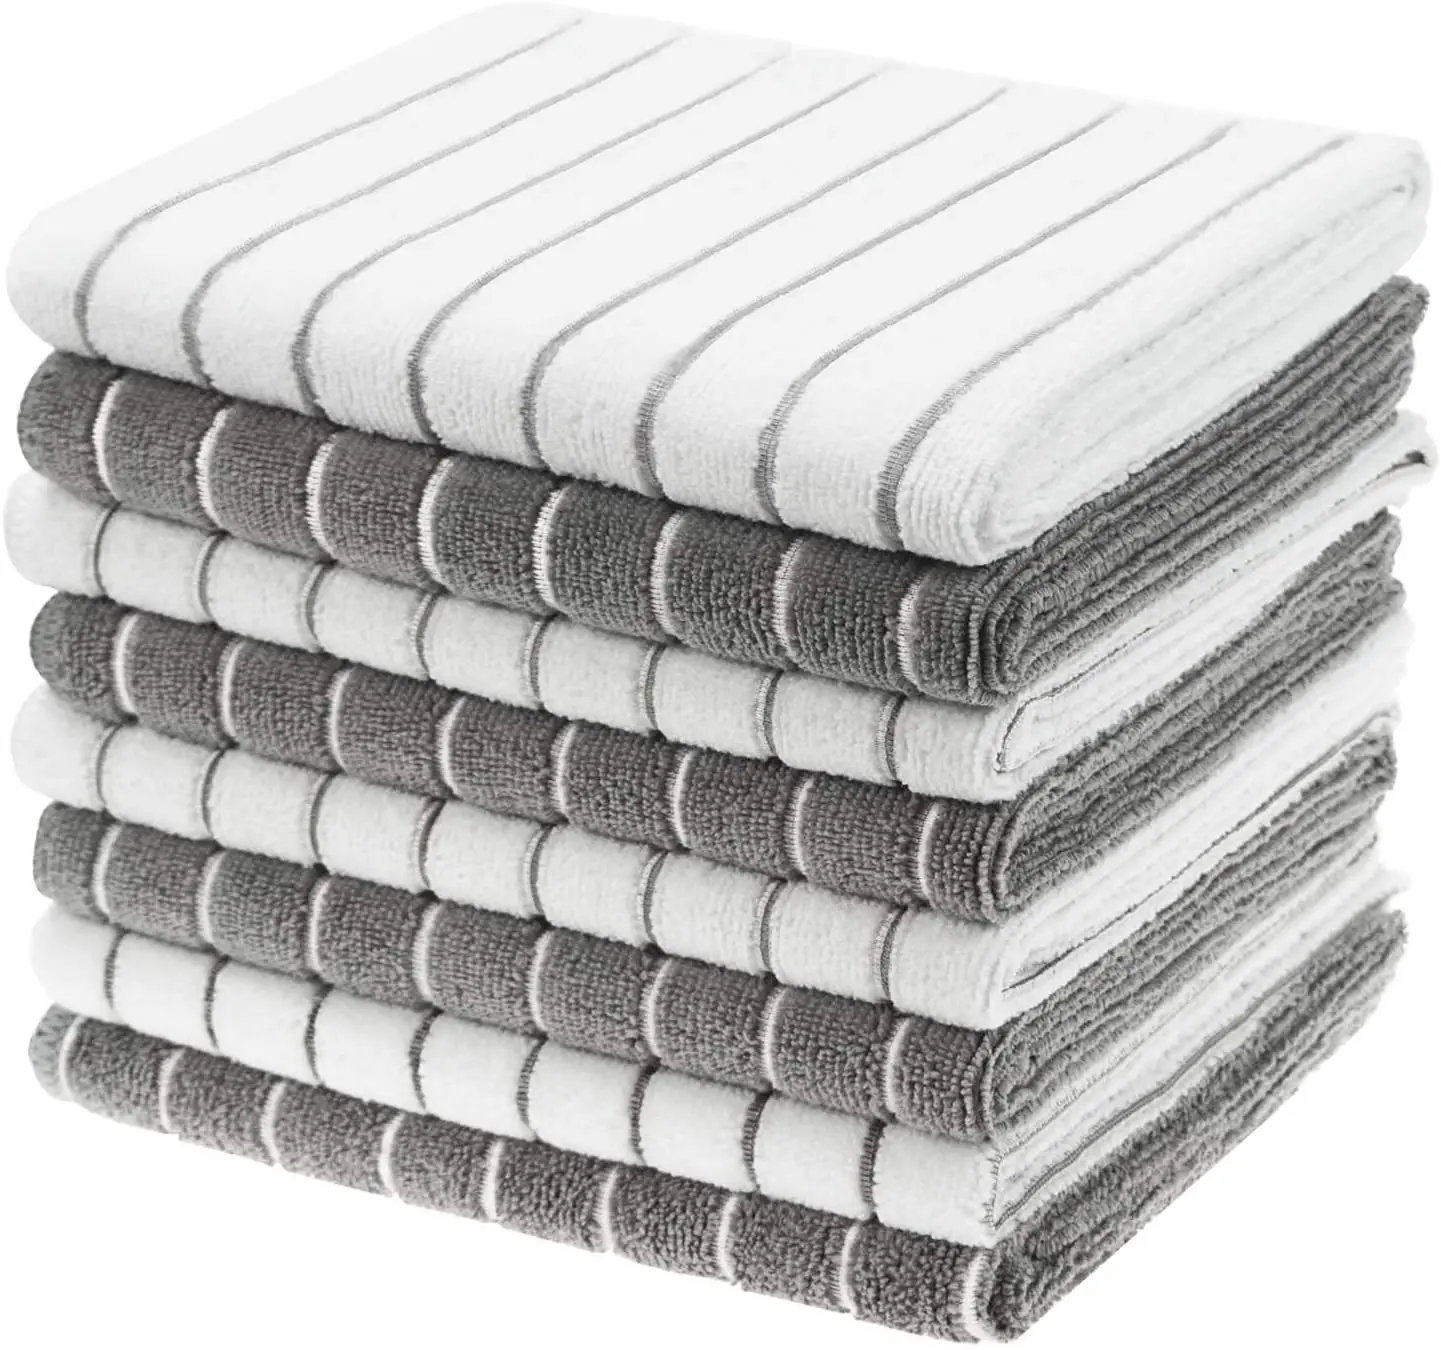 Microfiber Kitchen Towels Stripe Designed Soft And Super Absorbent Dish Towels 45 X 65 Cm Gray And White Buy Grey And White Striped Hand Towels Microfiber Towel Tea Towel Product On Alibaba Com